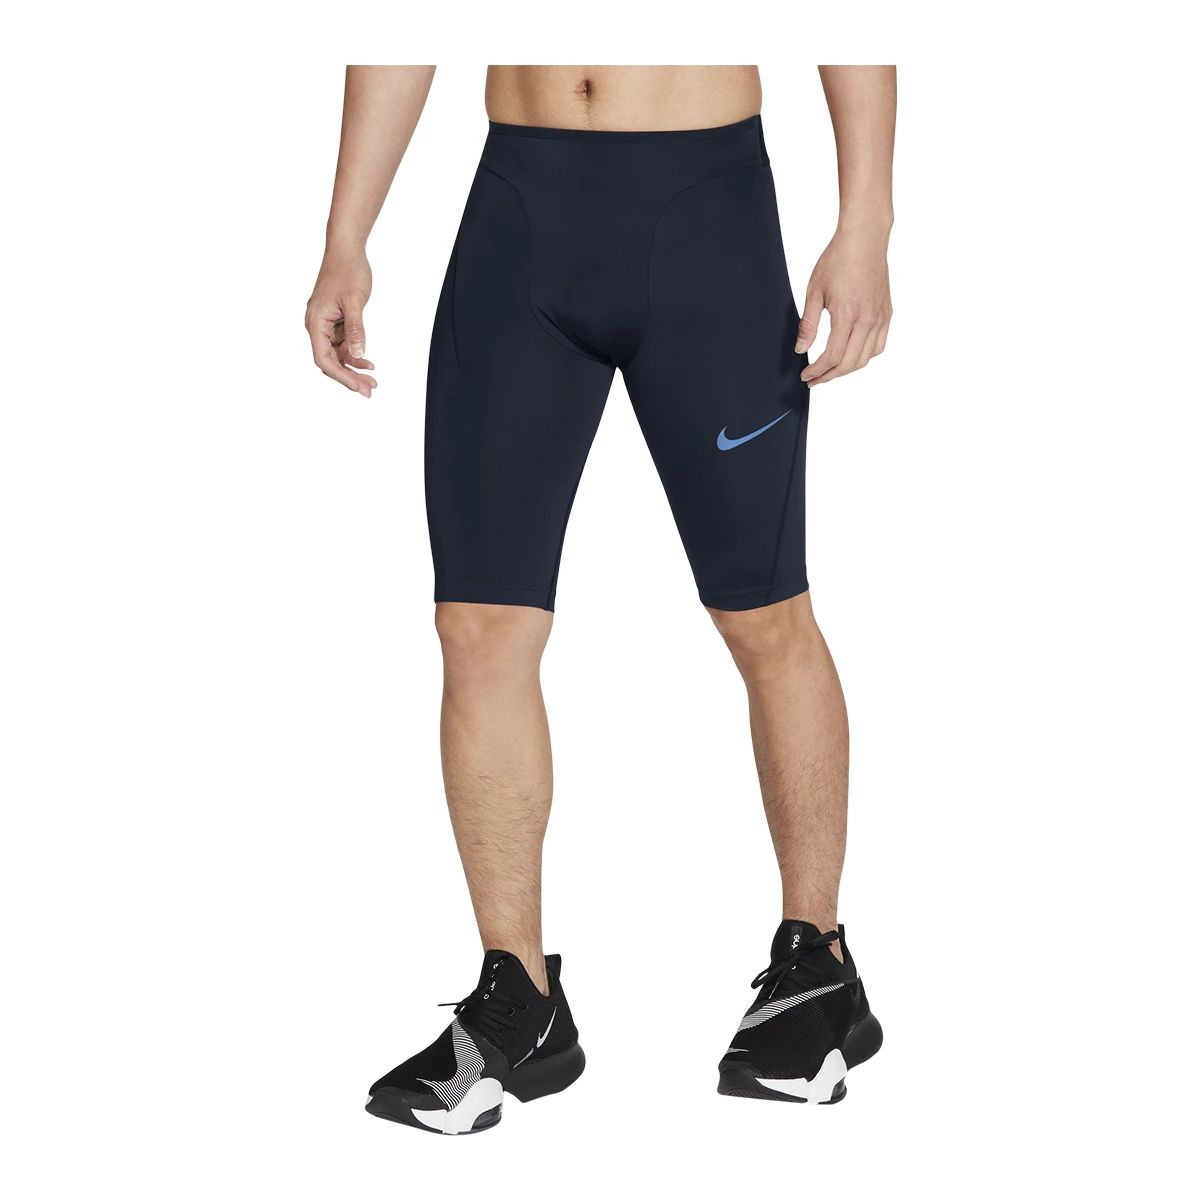 https://media-www.sportchek.ca/product/div-03-softgoods/dpt-70-athletic-clothing/sdpt-01-mens/333388139/nike-pro-combat-compression-s-navyobsidian-coast-s--5622362a-5c8a-41a4-aeac-624aedb3ef35-jpgrendition.jpg